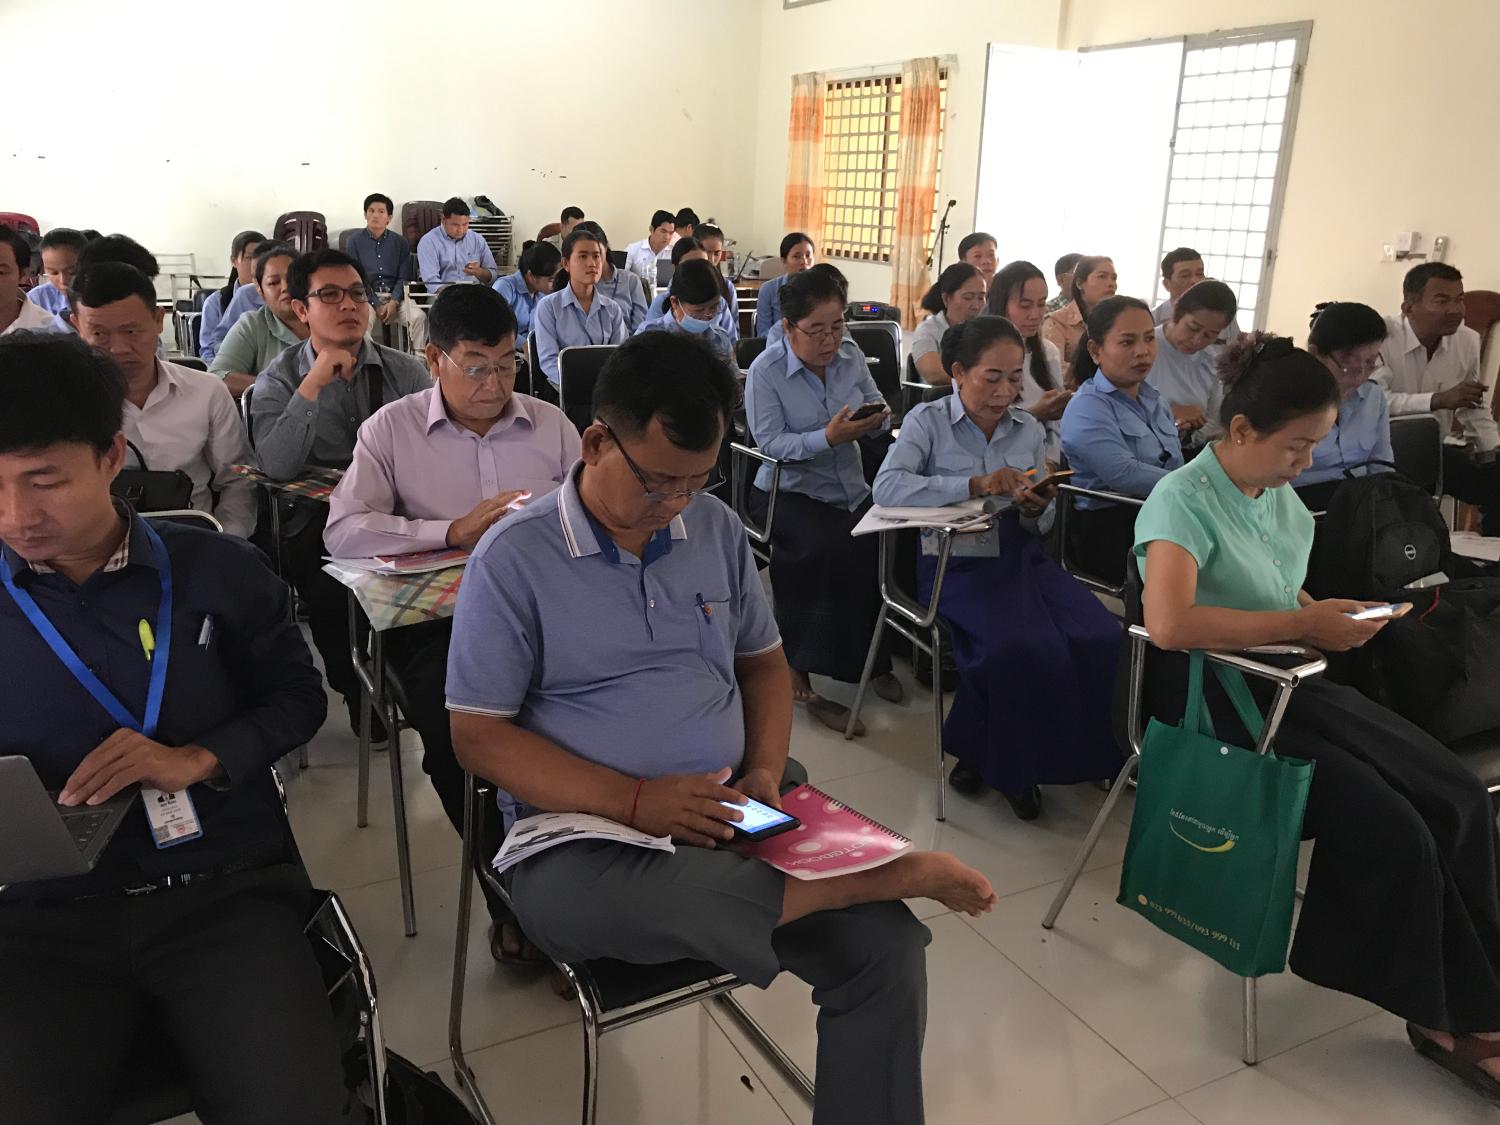 Optimizing Assessment for All workshop in Cambodia